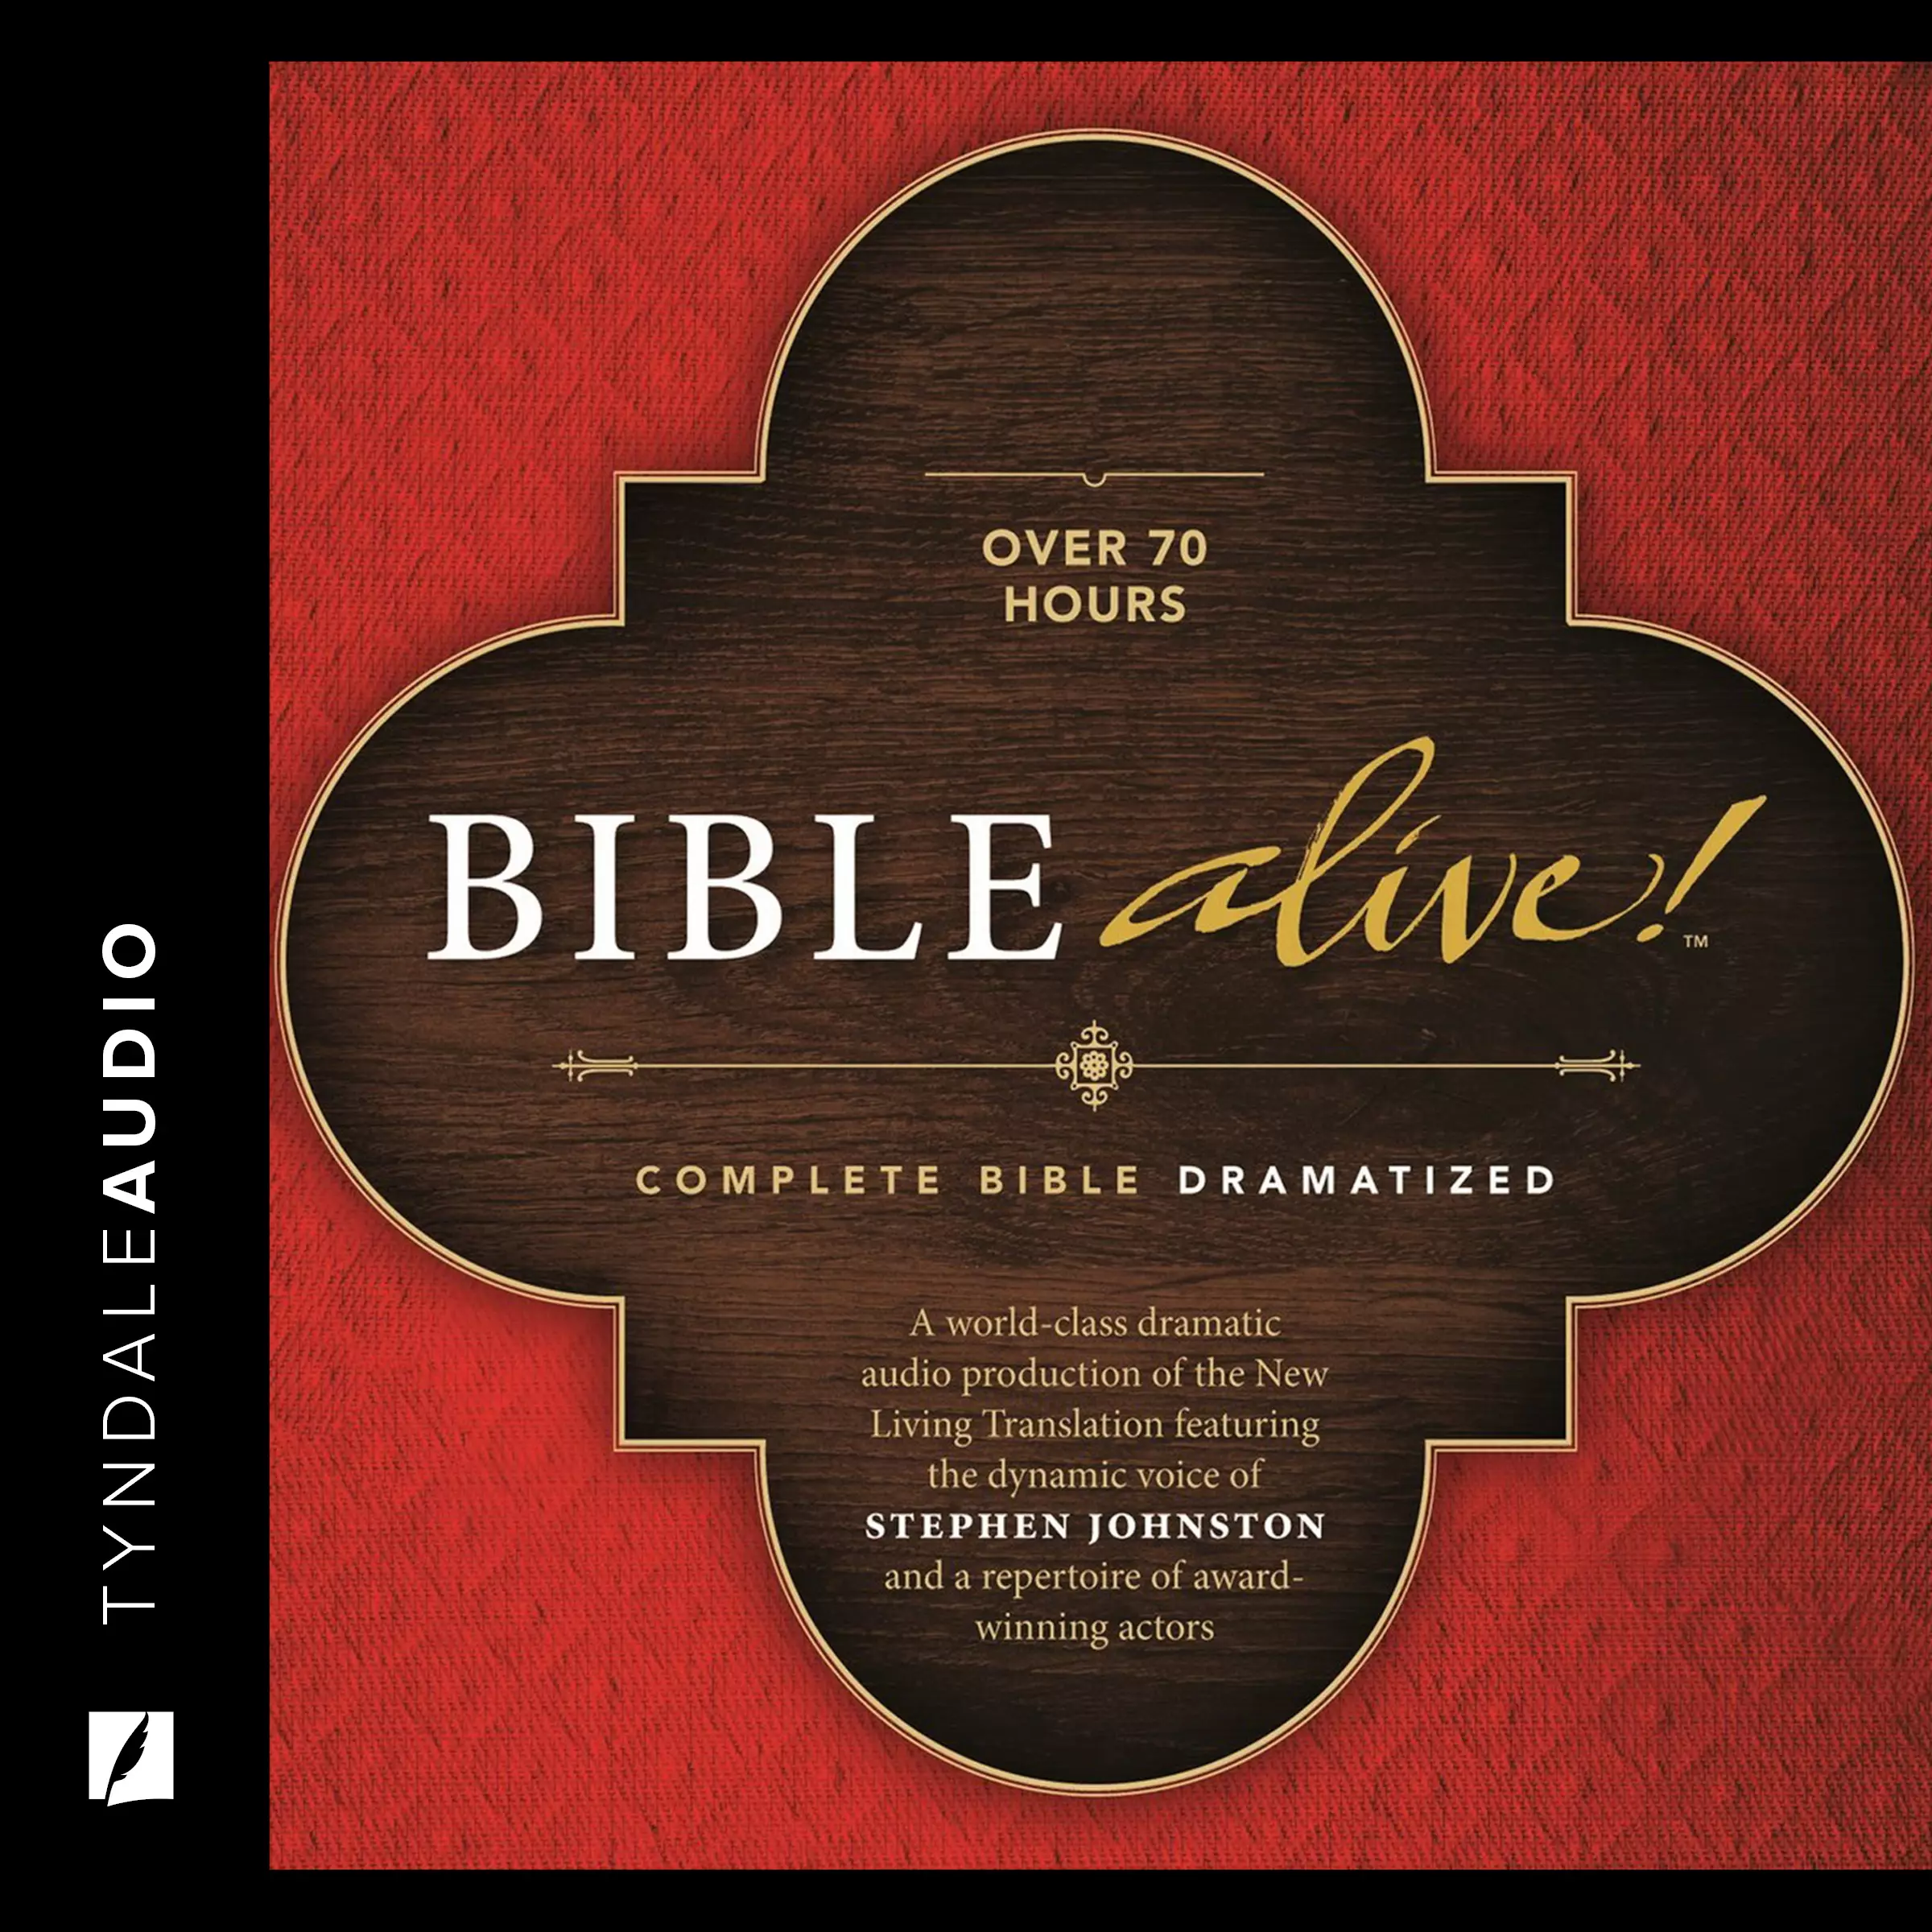 Bible Alive!